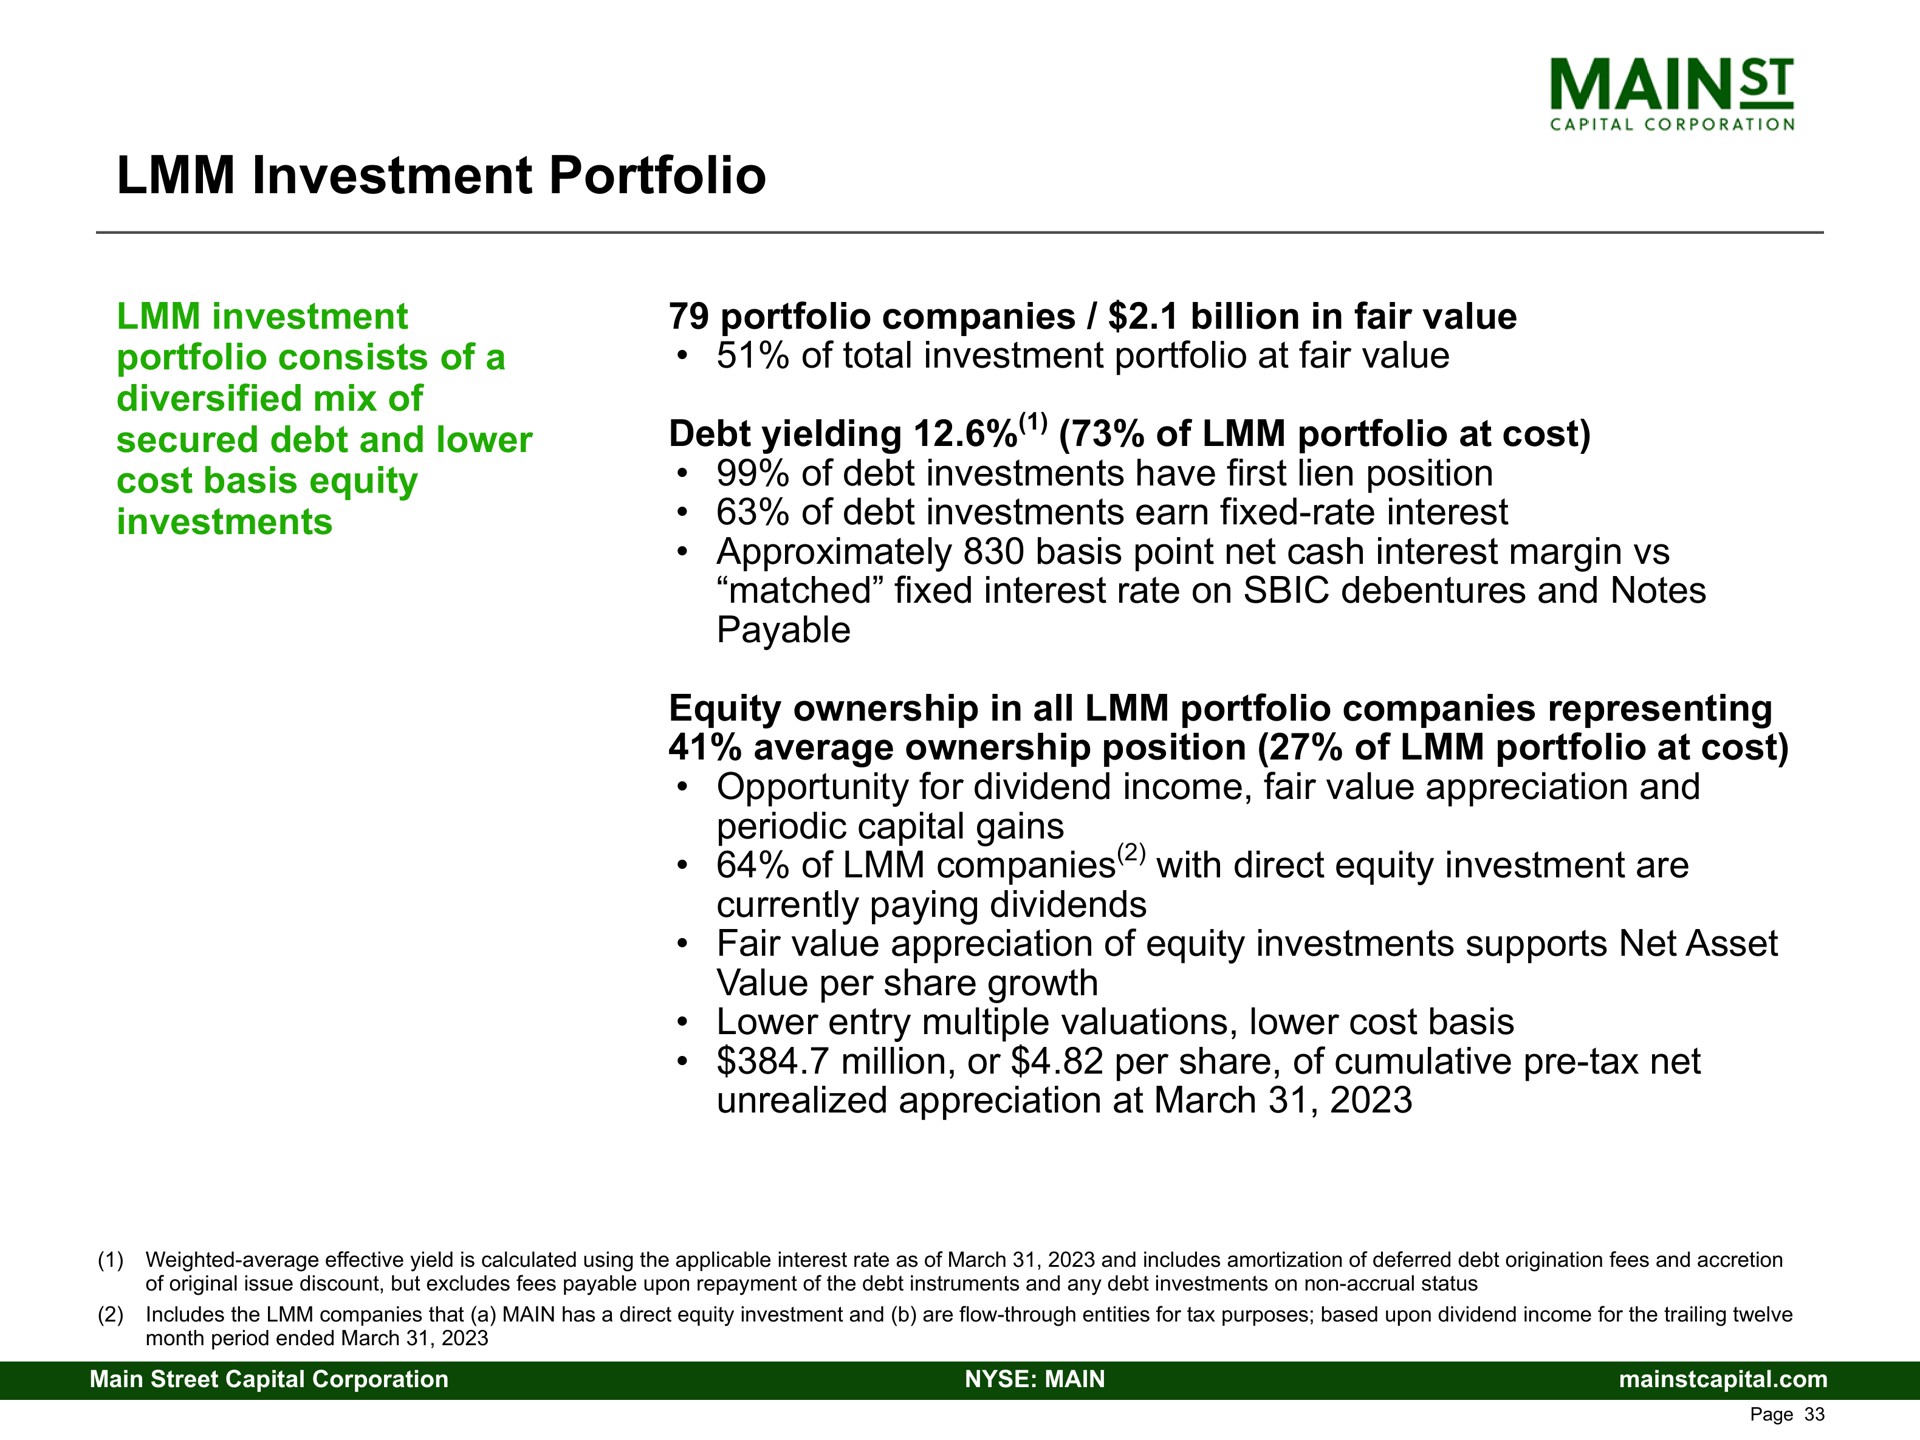 investment portfolio investment portfolio consists of a diversified mix of secured debt and lower cost basis equity investments portfolio companies billion in fair value of total investment portfolio at fair value debt yielding of portfolio at cost of debt investments have first lien position of debt investments earn fixed rate interest approximately basis point net cash interest margin matched fixed interest rate on debentures and notes payable equity ownership in all portfolio companies representing average ownership position of portfolio at cost opportunity for dividend income fair value appreciation and periodic capital gains of companies with direct equity investment are currently paying dividends fair value appreciation of equity investments supports net asset value per share growth lower entry multiple valuations lower cost basis million or per share of cumulative tax net unrealized appreciation at march mains | Main Street Capital